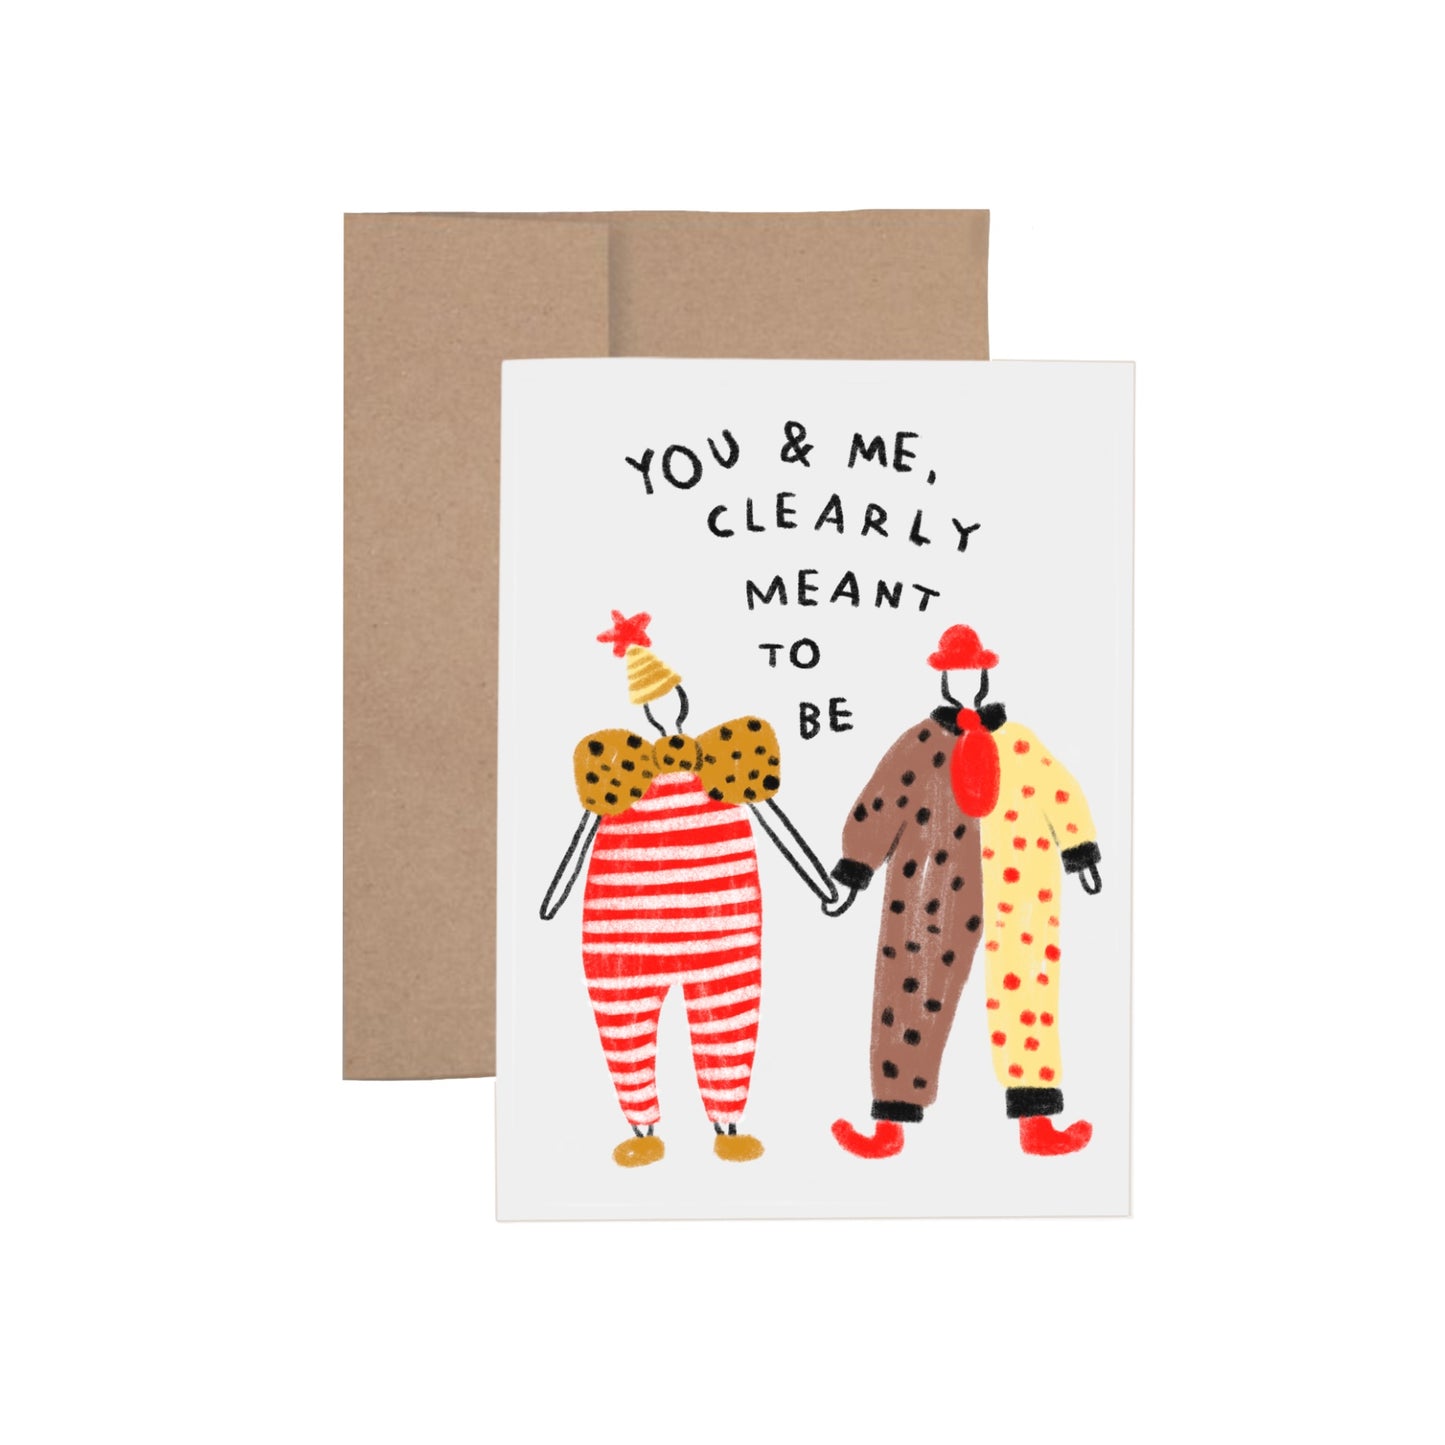 YOU & ME, CLEARLY MEANT TO BE Greeting Card